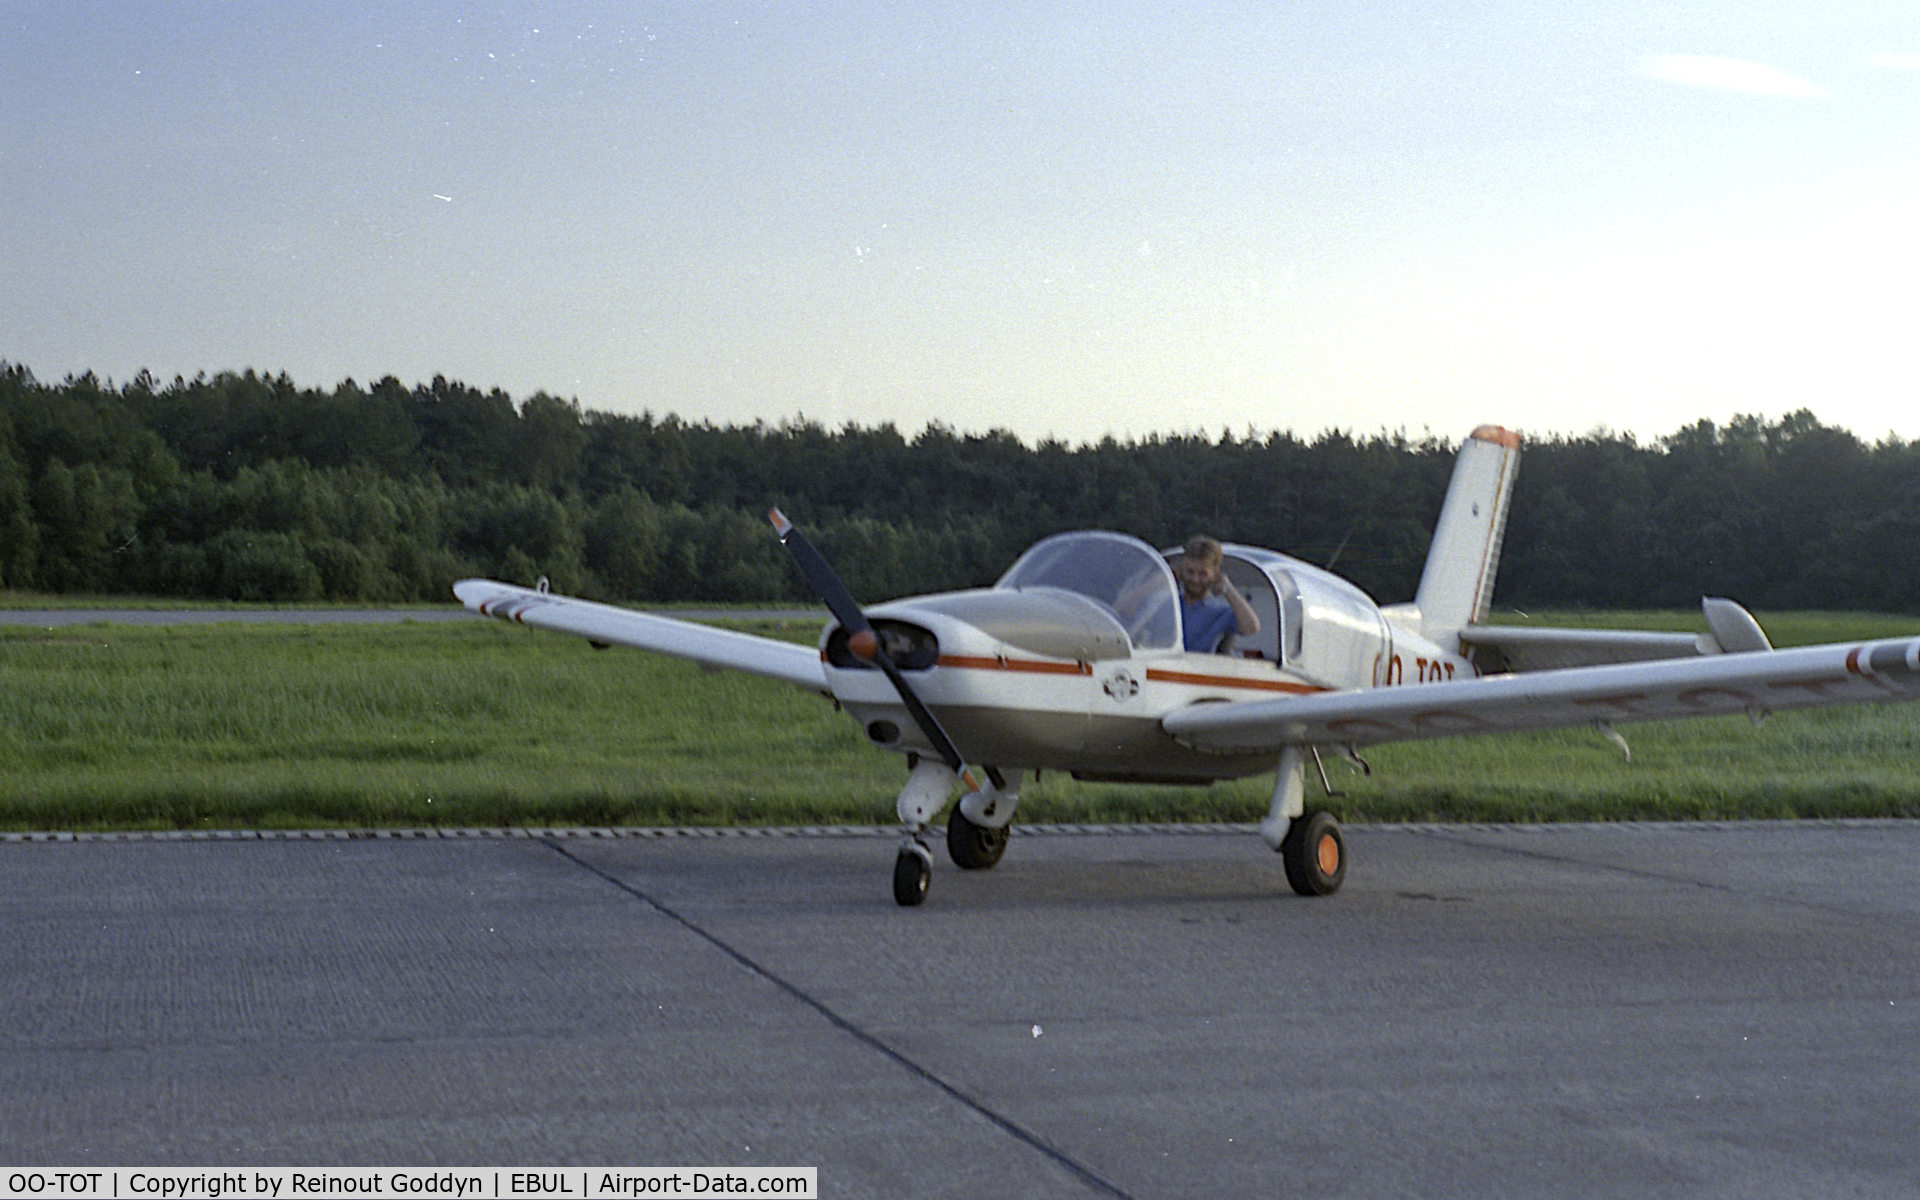 OO-TOT, Socata MS-880B Rallye Club C/N 1226, OO-TOT in 1985, engine switched off after some solo training - me clearing the ol' eustachian tubes after landing.